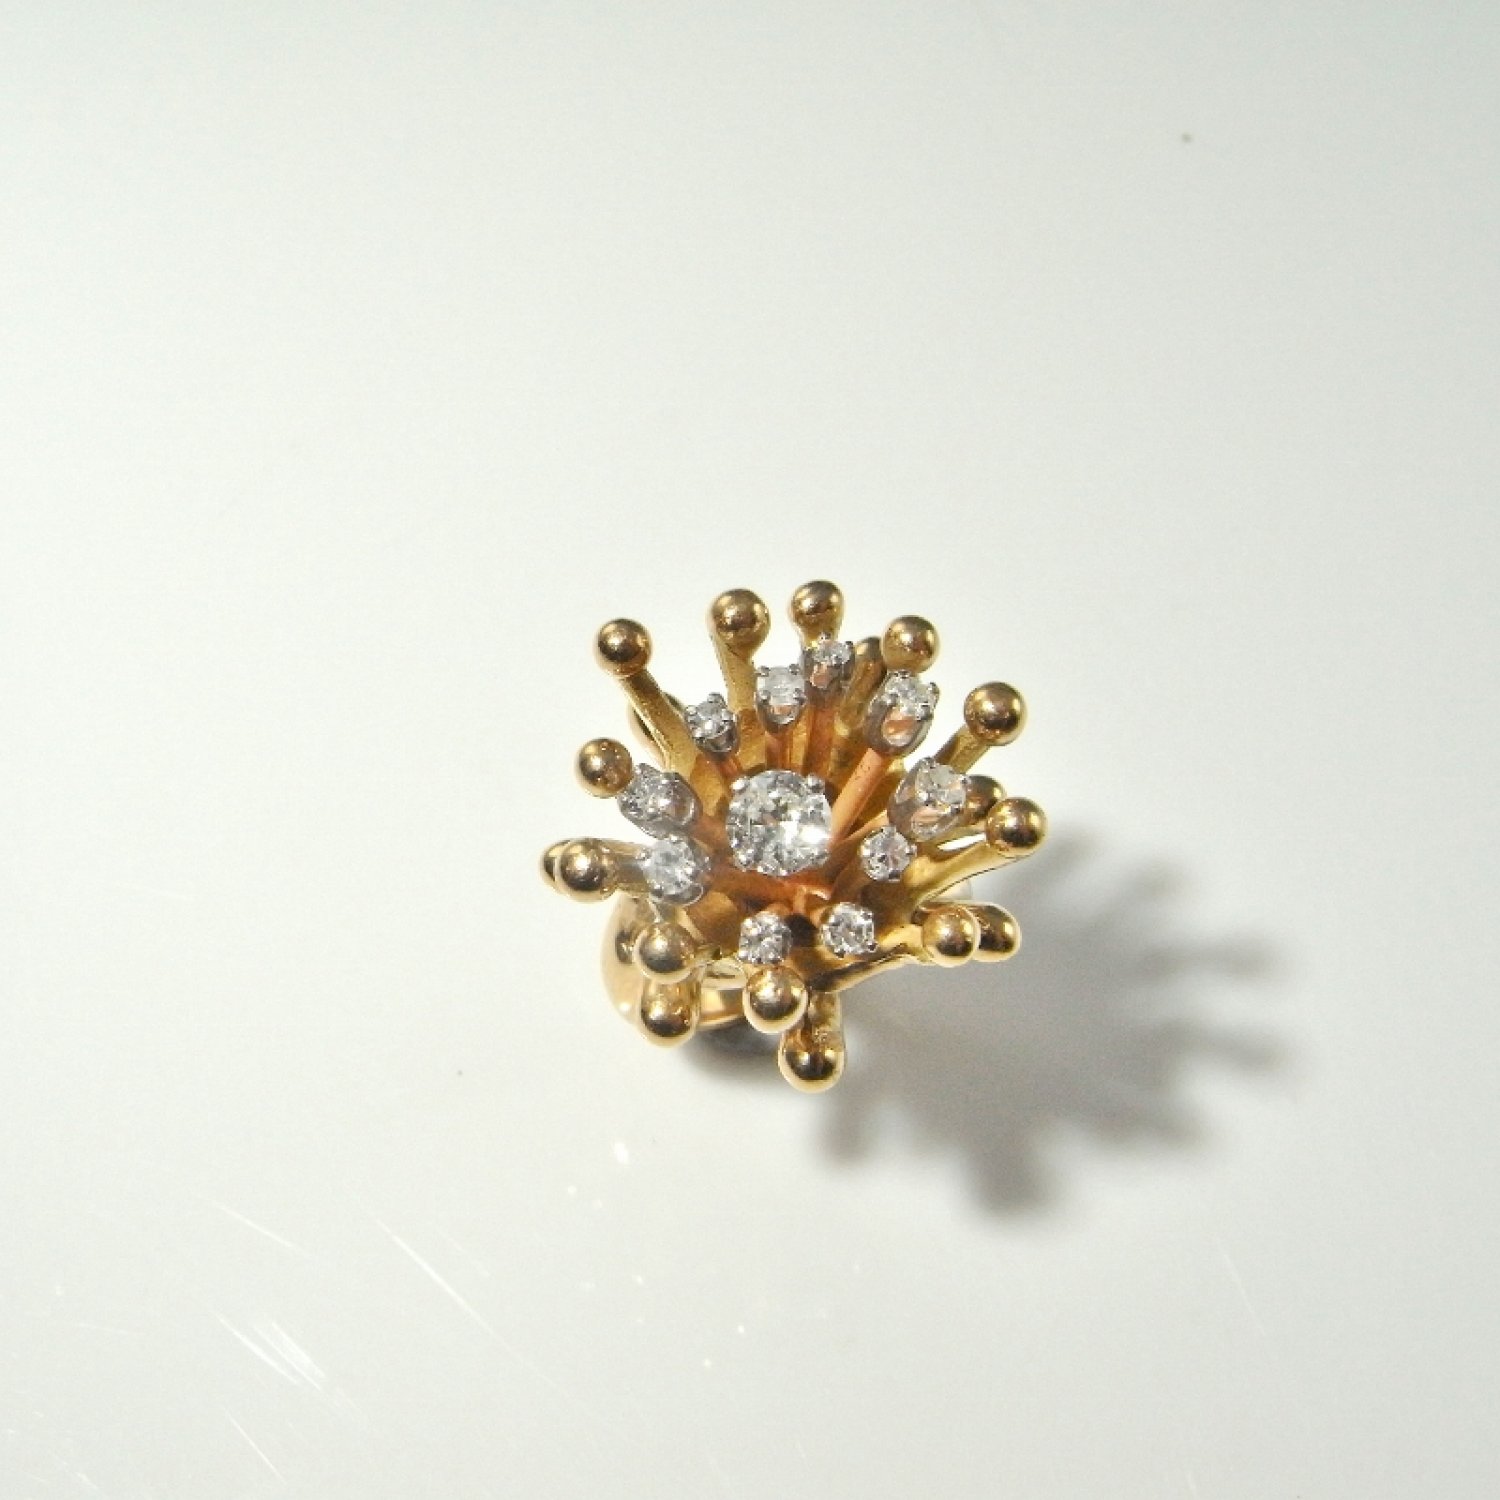 Starburst Diamond 14K Gold Ring Unique Engagement Ring One of a Kind Wedding Ring Anniversary Ring Dress ring Cocktail Ring Designer Ring Mid Century Modernist 1950s 1960s 1970s handmade Unique Statement Ring Sculptural Rare Sparkly Modern Atomic